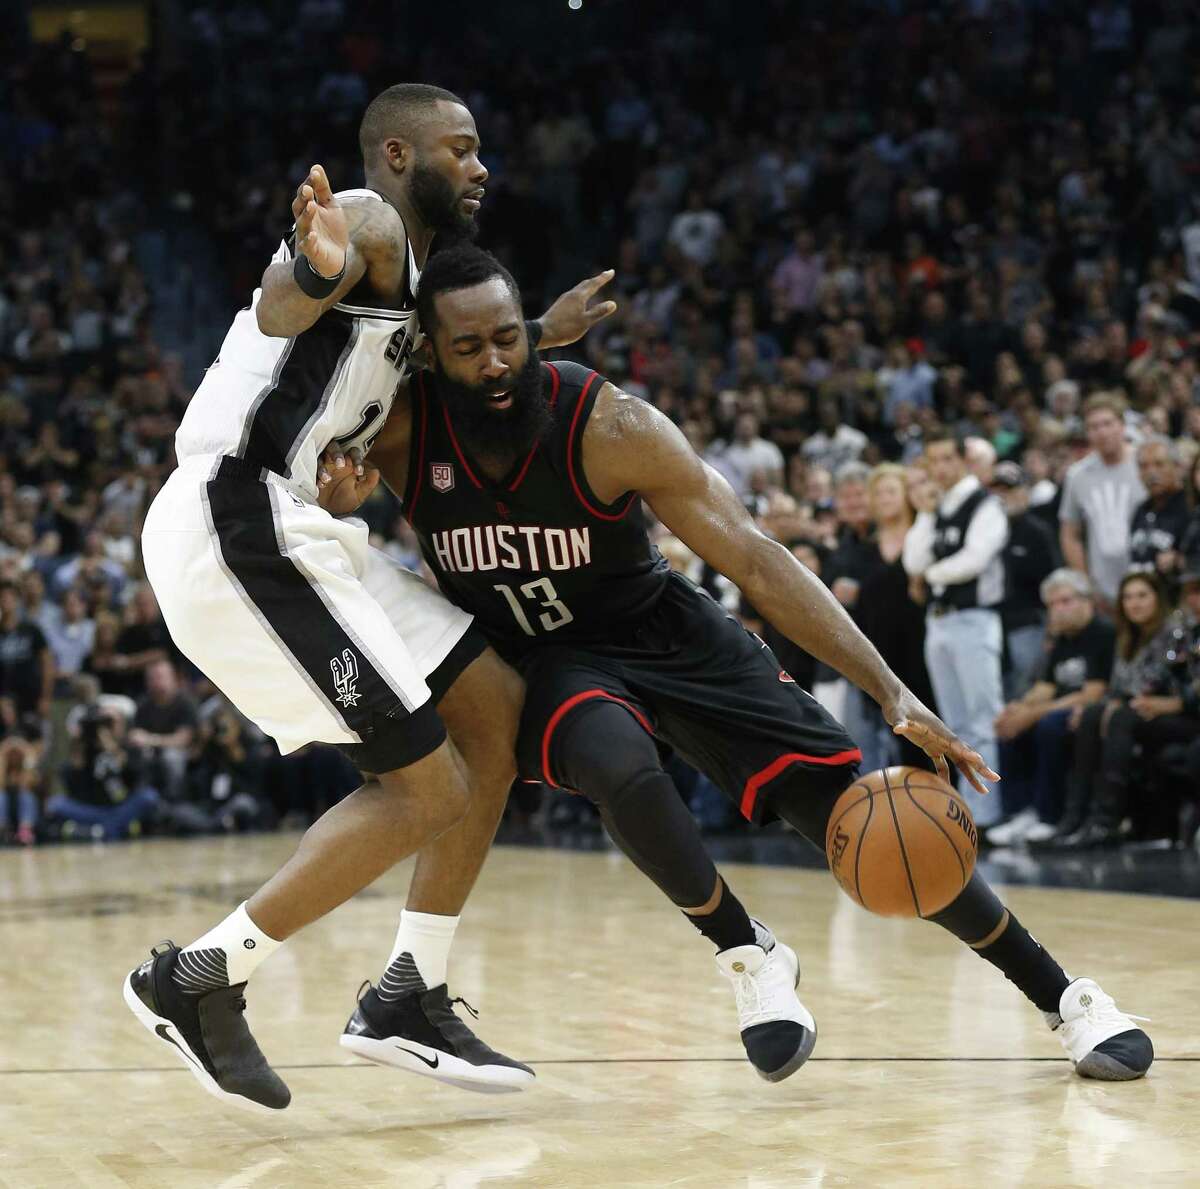 Spurs’ Jonathon Simmons draws a charging fould against the Rockets’ James Harden during Game 5 at the AT&T Center on May 9, 2017.